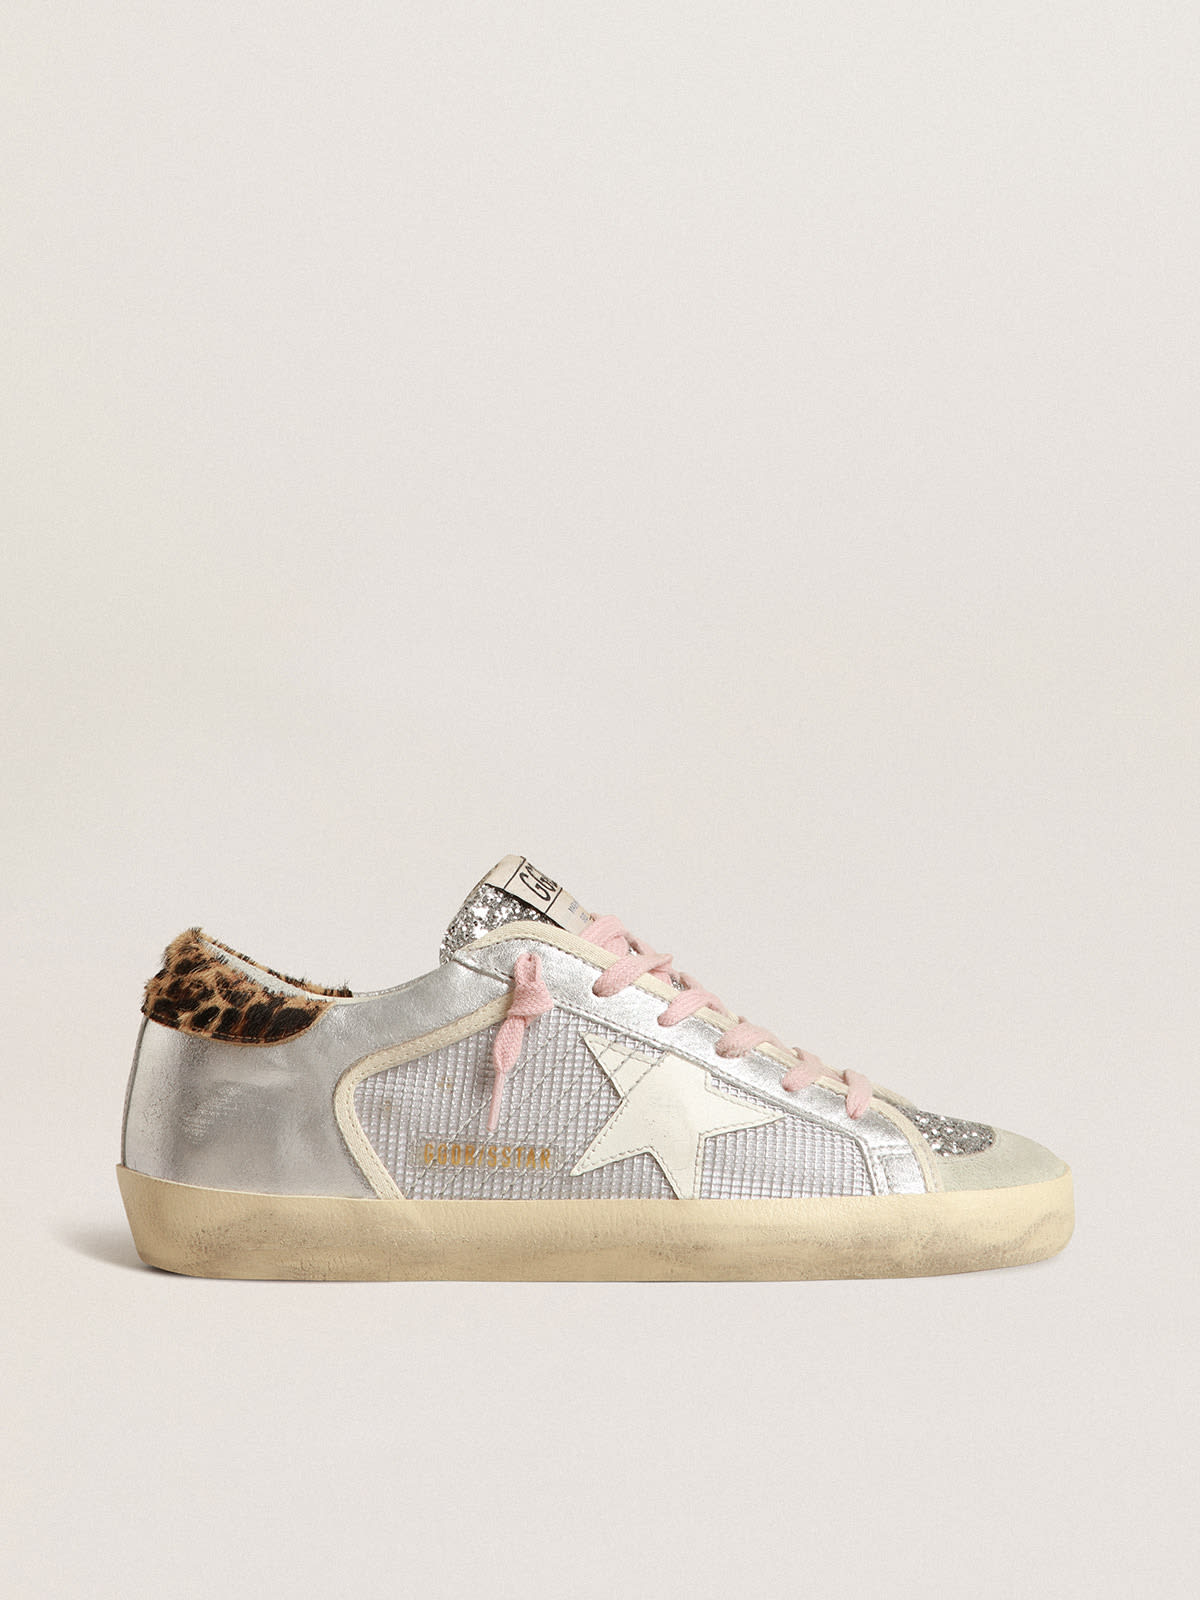 Golden Goose - Super-Star LTD in mesh and suede with silver glitter tongue in 